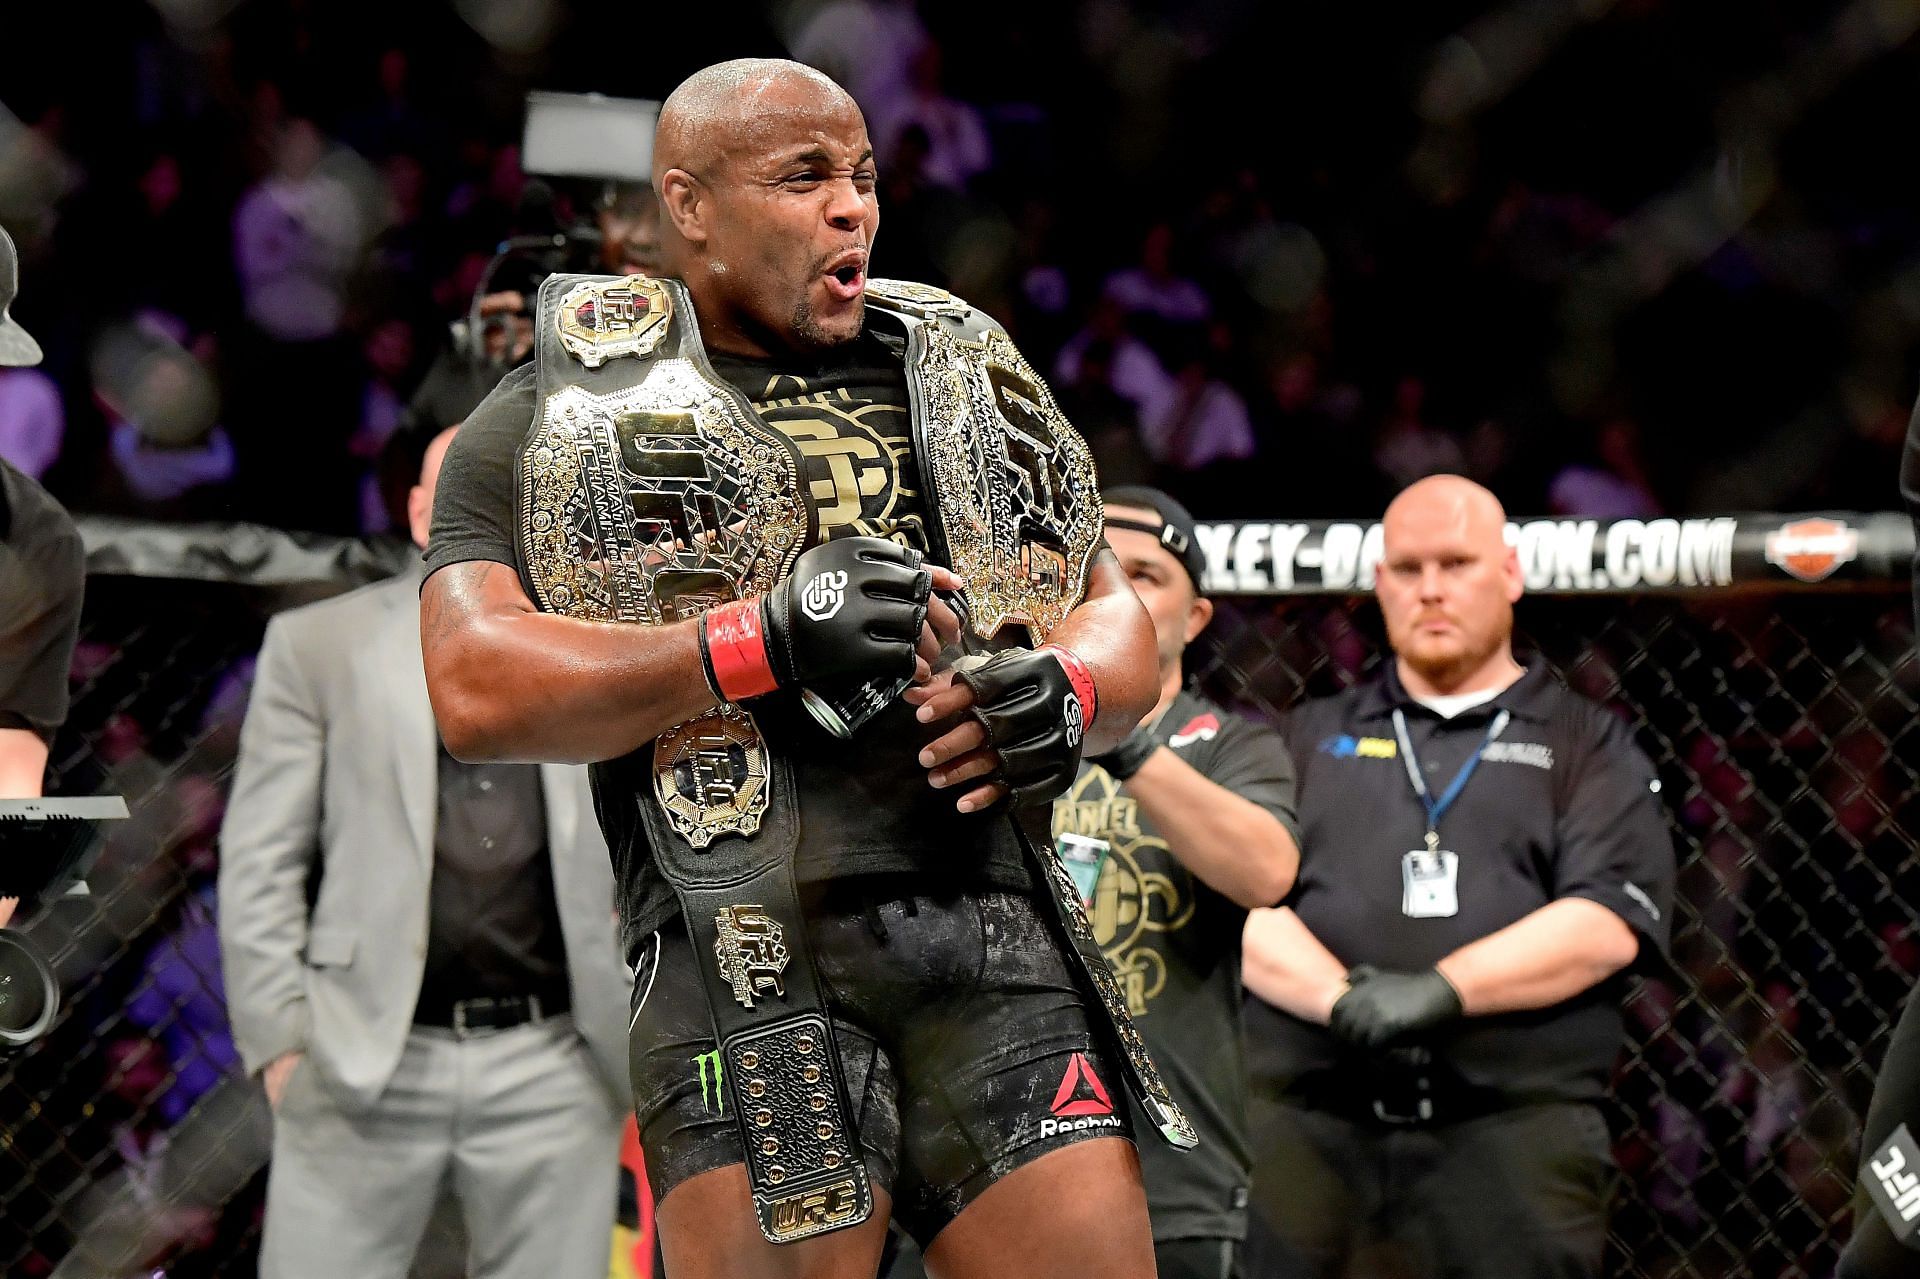 Daniel Cormier&#039;s outstanding record makes him one of the greatest fighters in UFC history